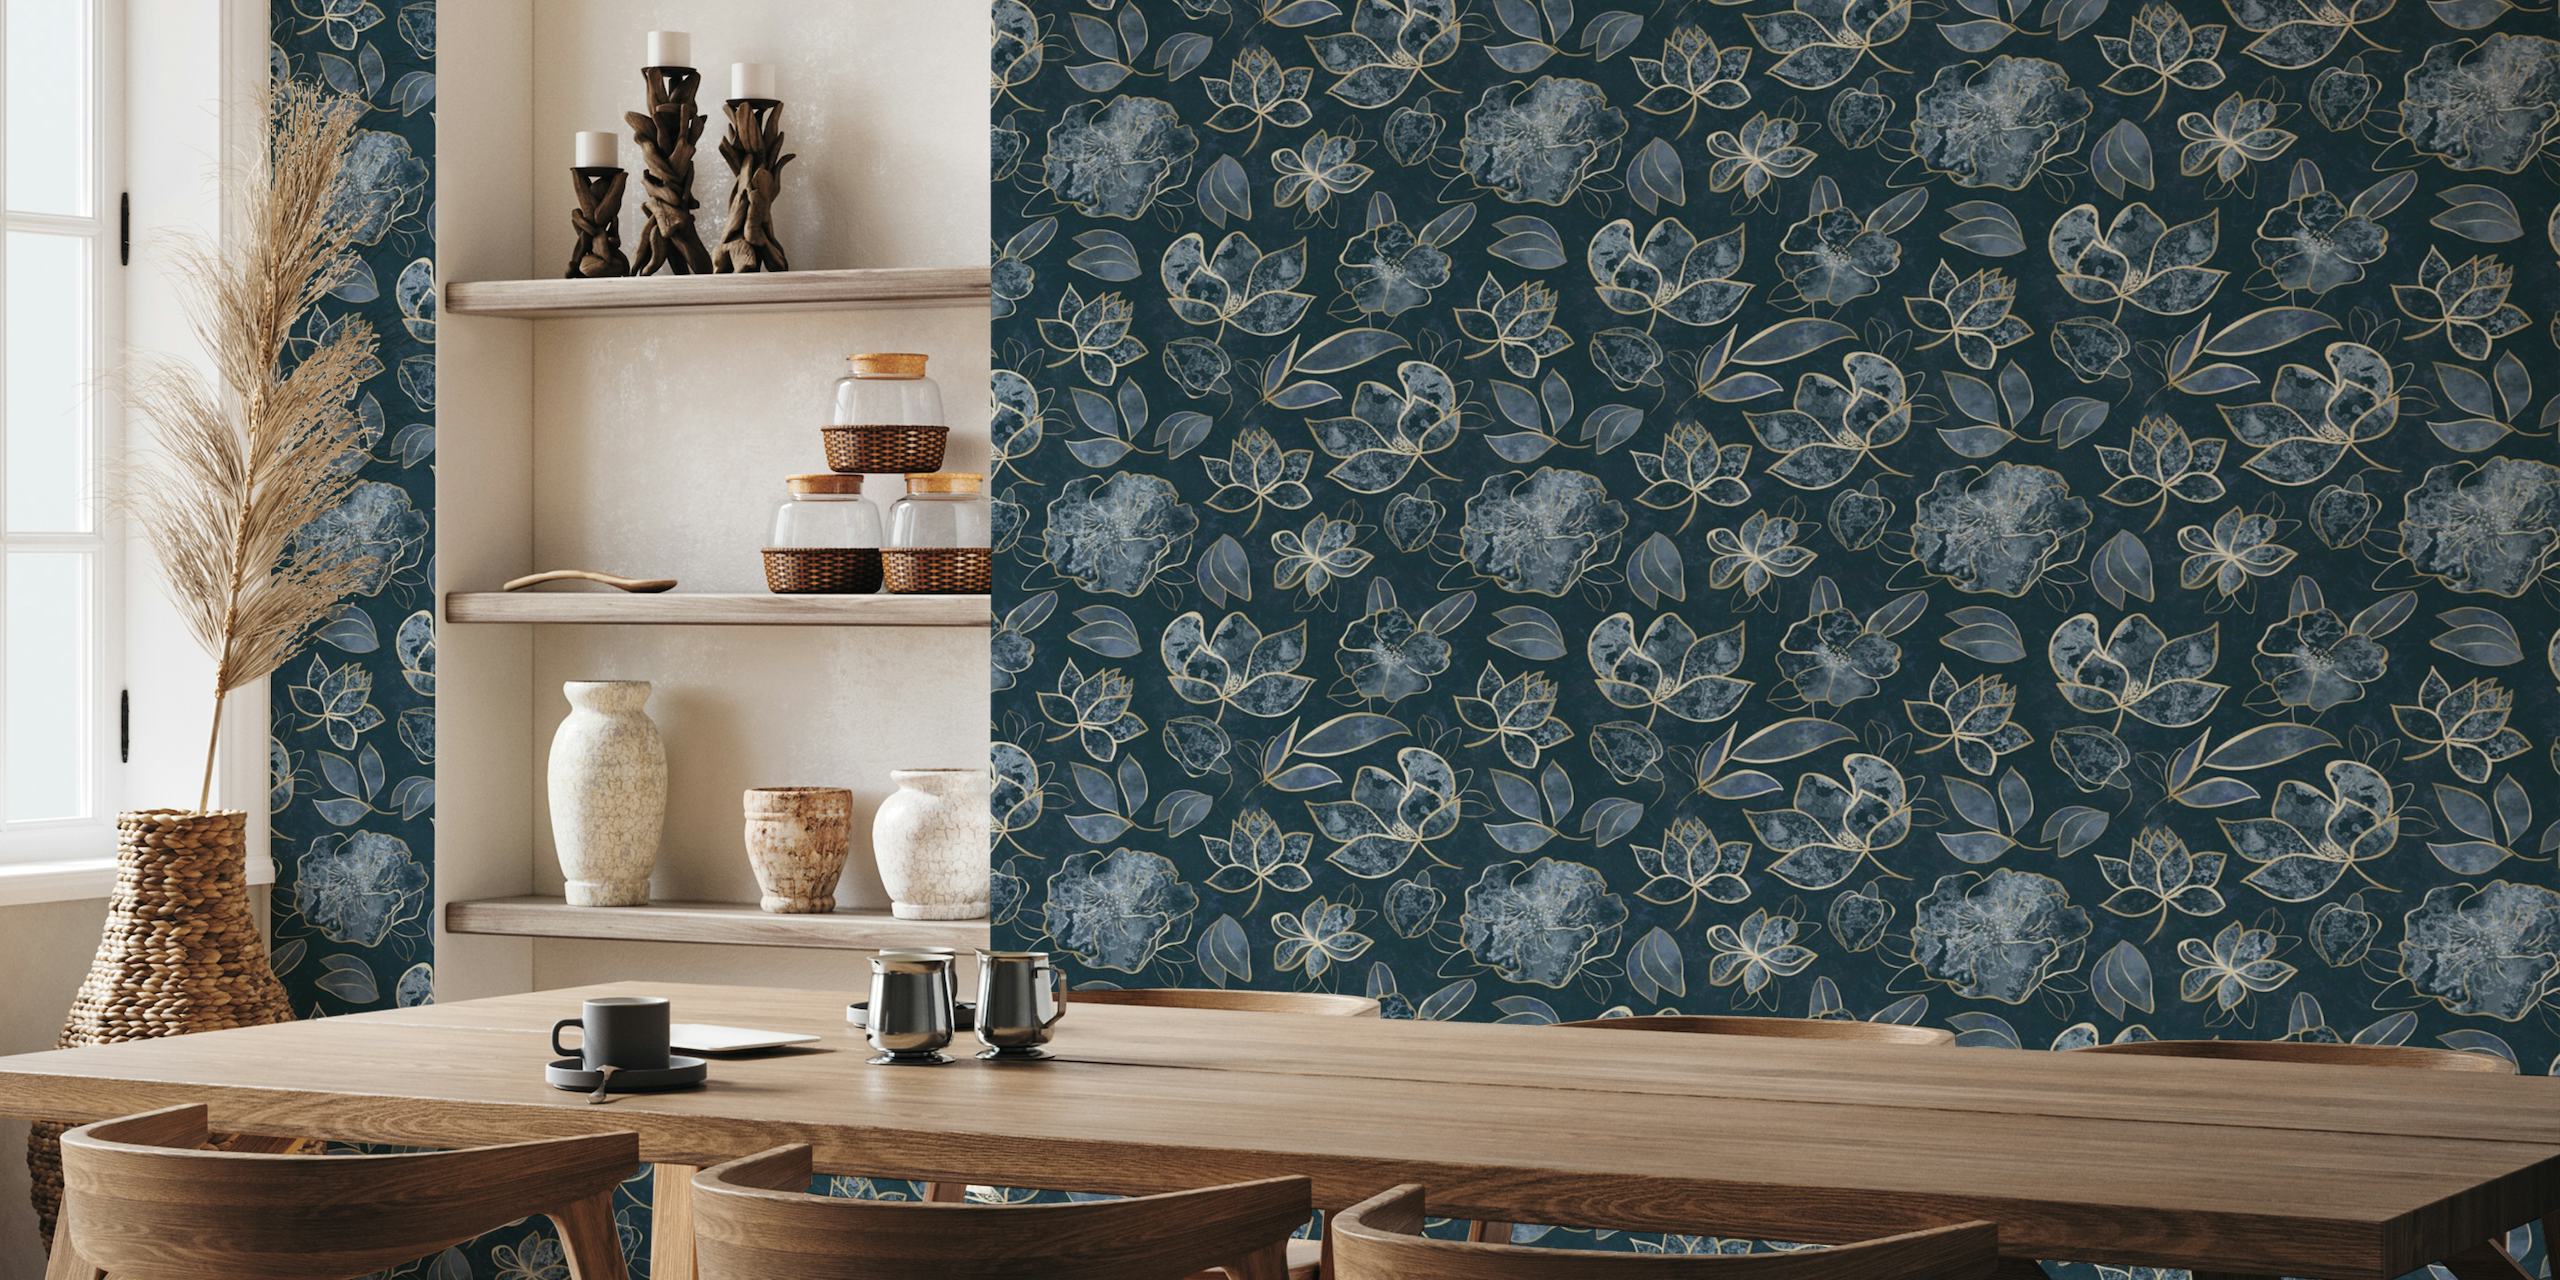 Elegant And Fancy Fantasy Flower Pattern In Turquoise And Gold behang